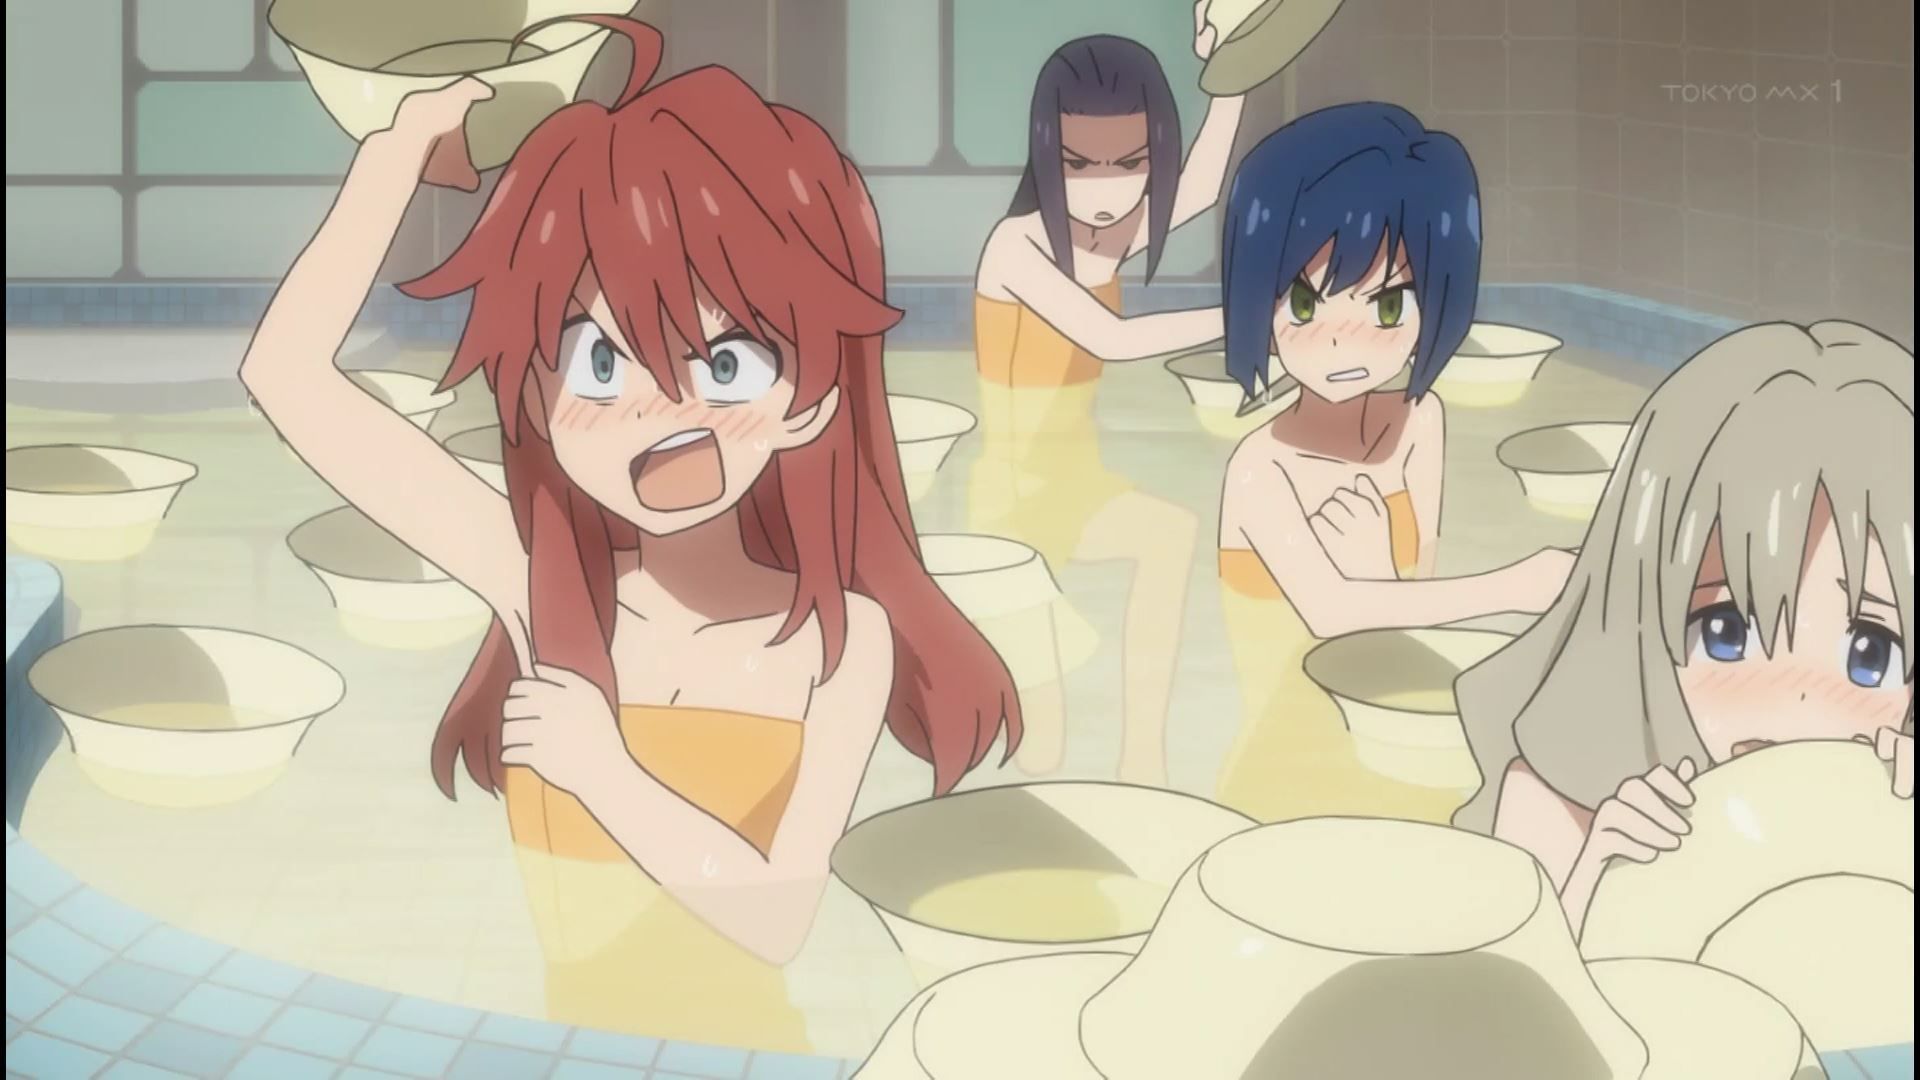 such as the bath scene and the girl's suit melts in anime ' darling in the Franc kiss ' 8 story! 24